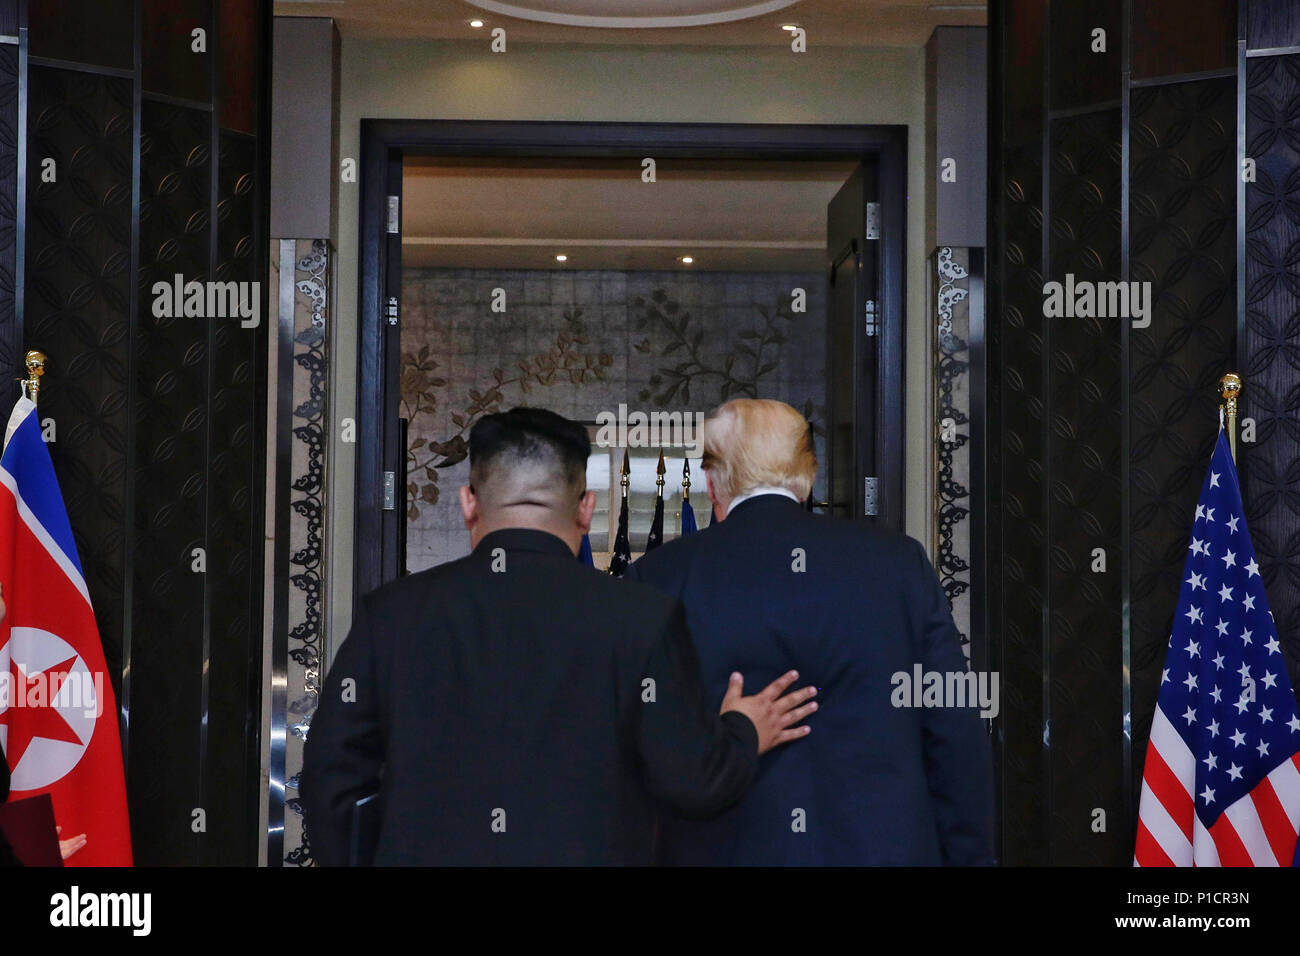 Singapore. 12th June, 2018. Top leader of the Democratic People's Republic of Korea (DPRK) Kim Jong Un (L) and U.S. President Donald Trump leave after signing a joint statement in Singapore on June 12, 2018. Credit: Ministry of Communication and Information of Singapore/Xinhua/Alamy Live News Stock Photo